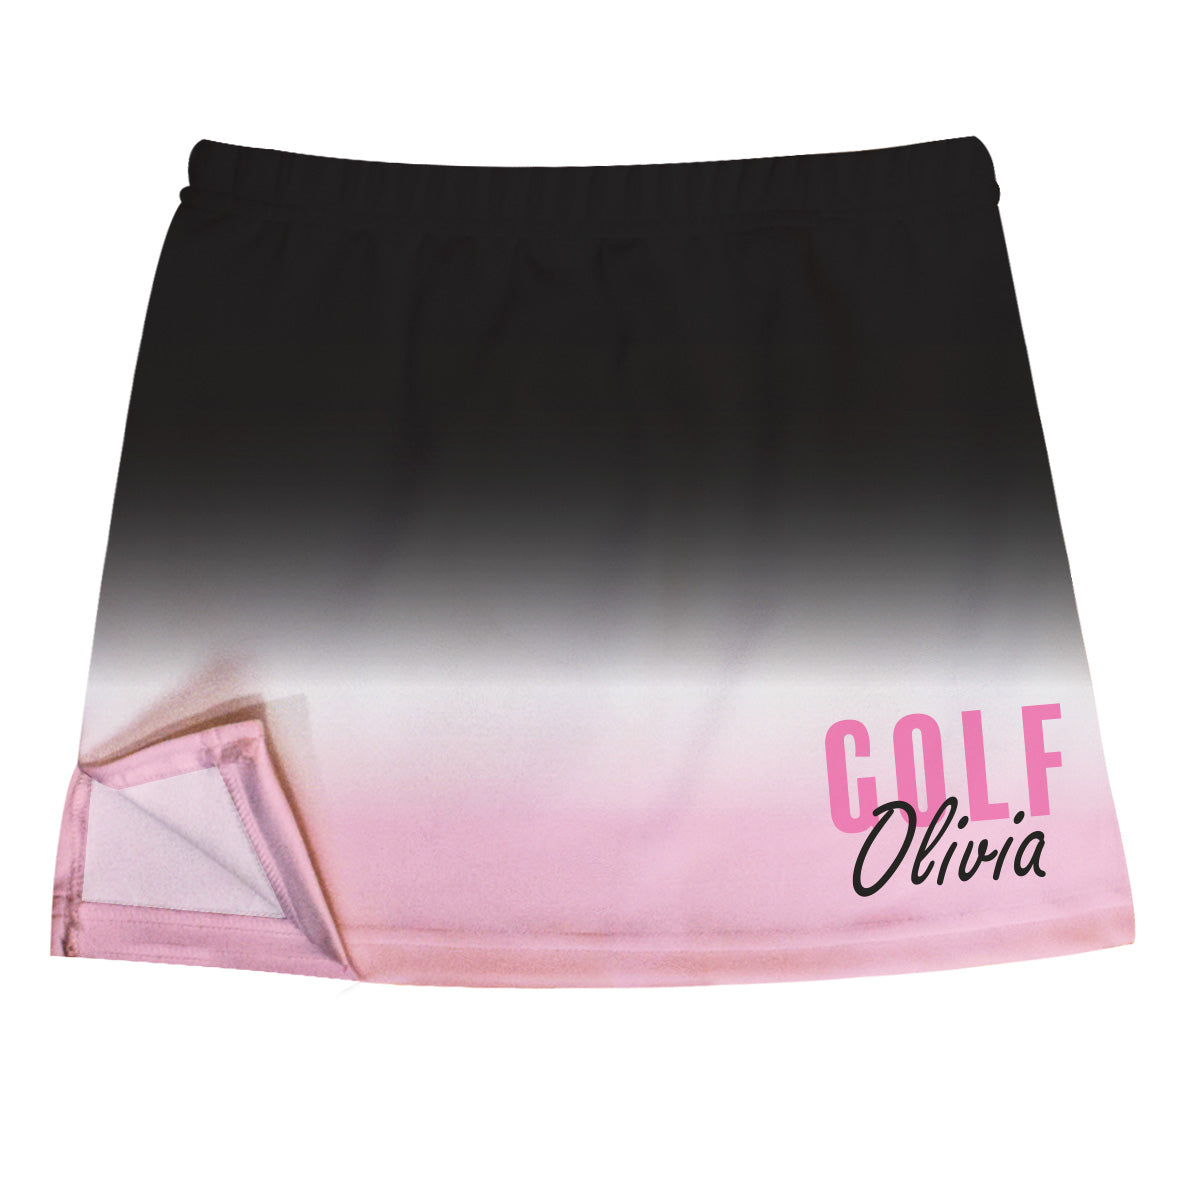 Golf Name Black And Pink Skirt With Side Vents - Wimziy&Co.